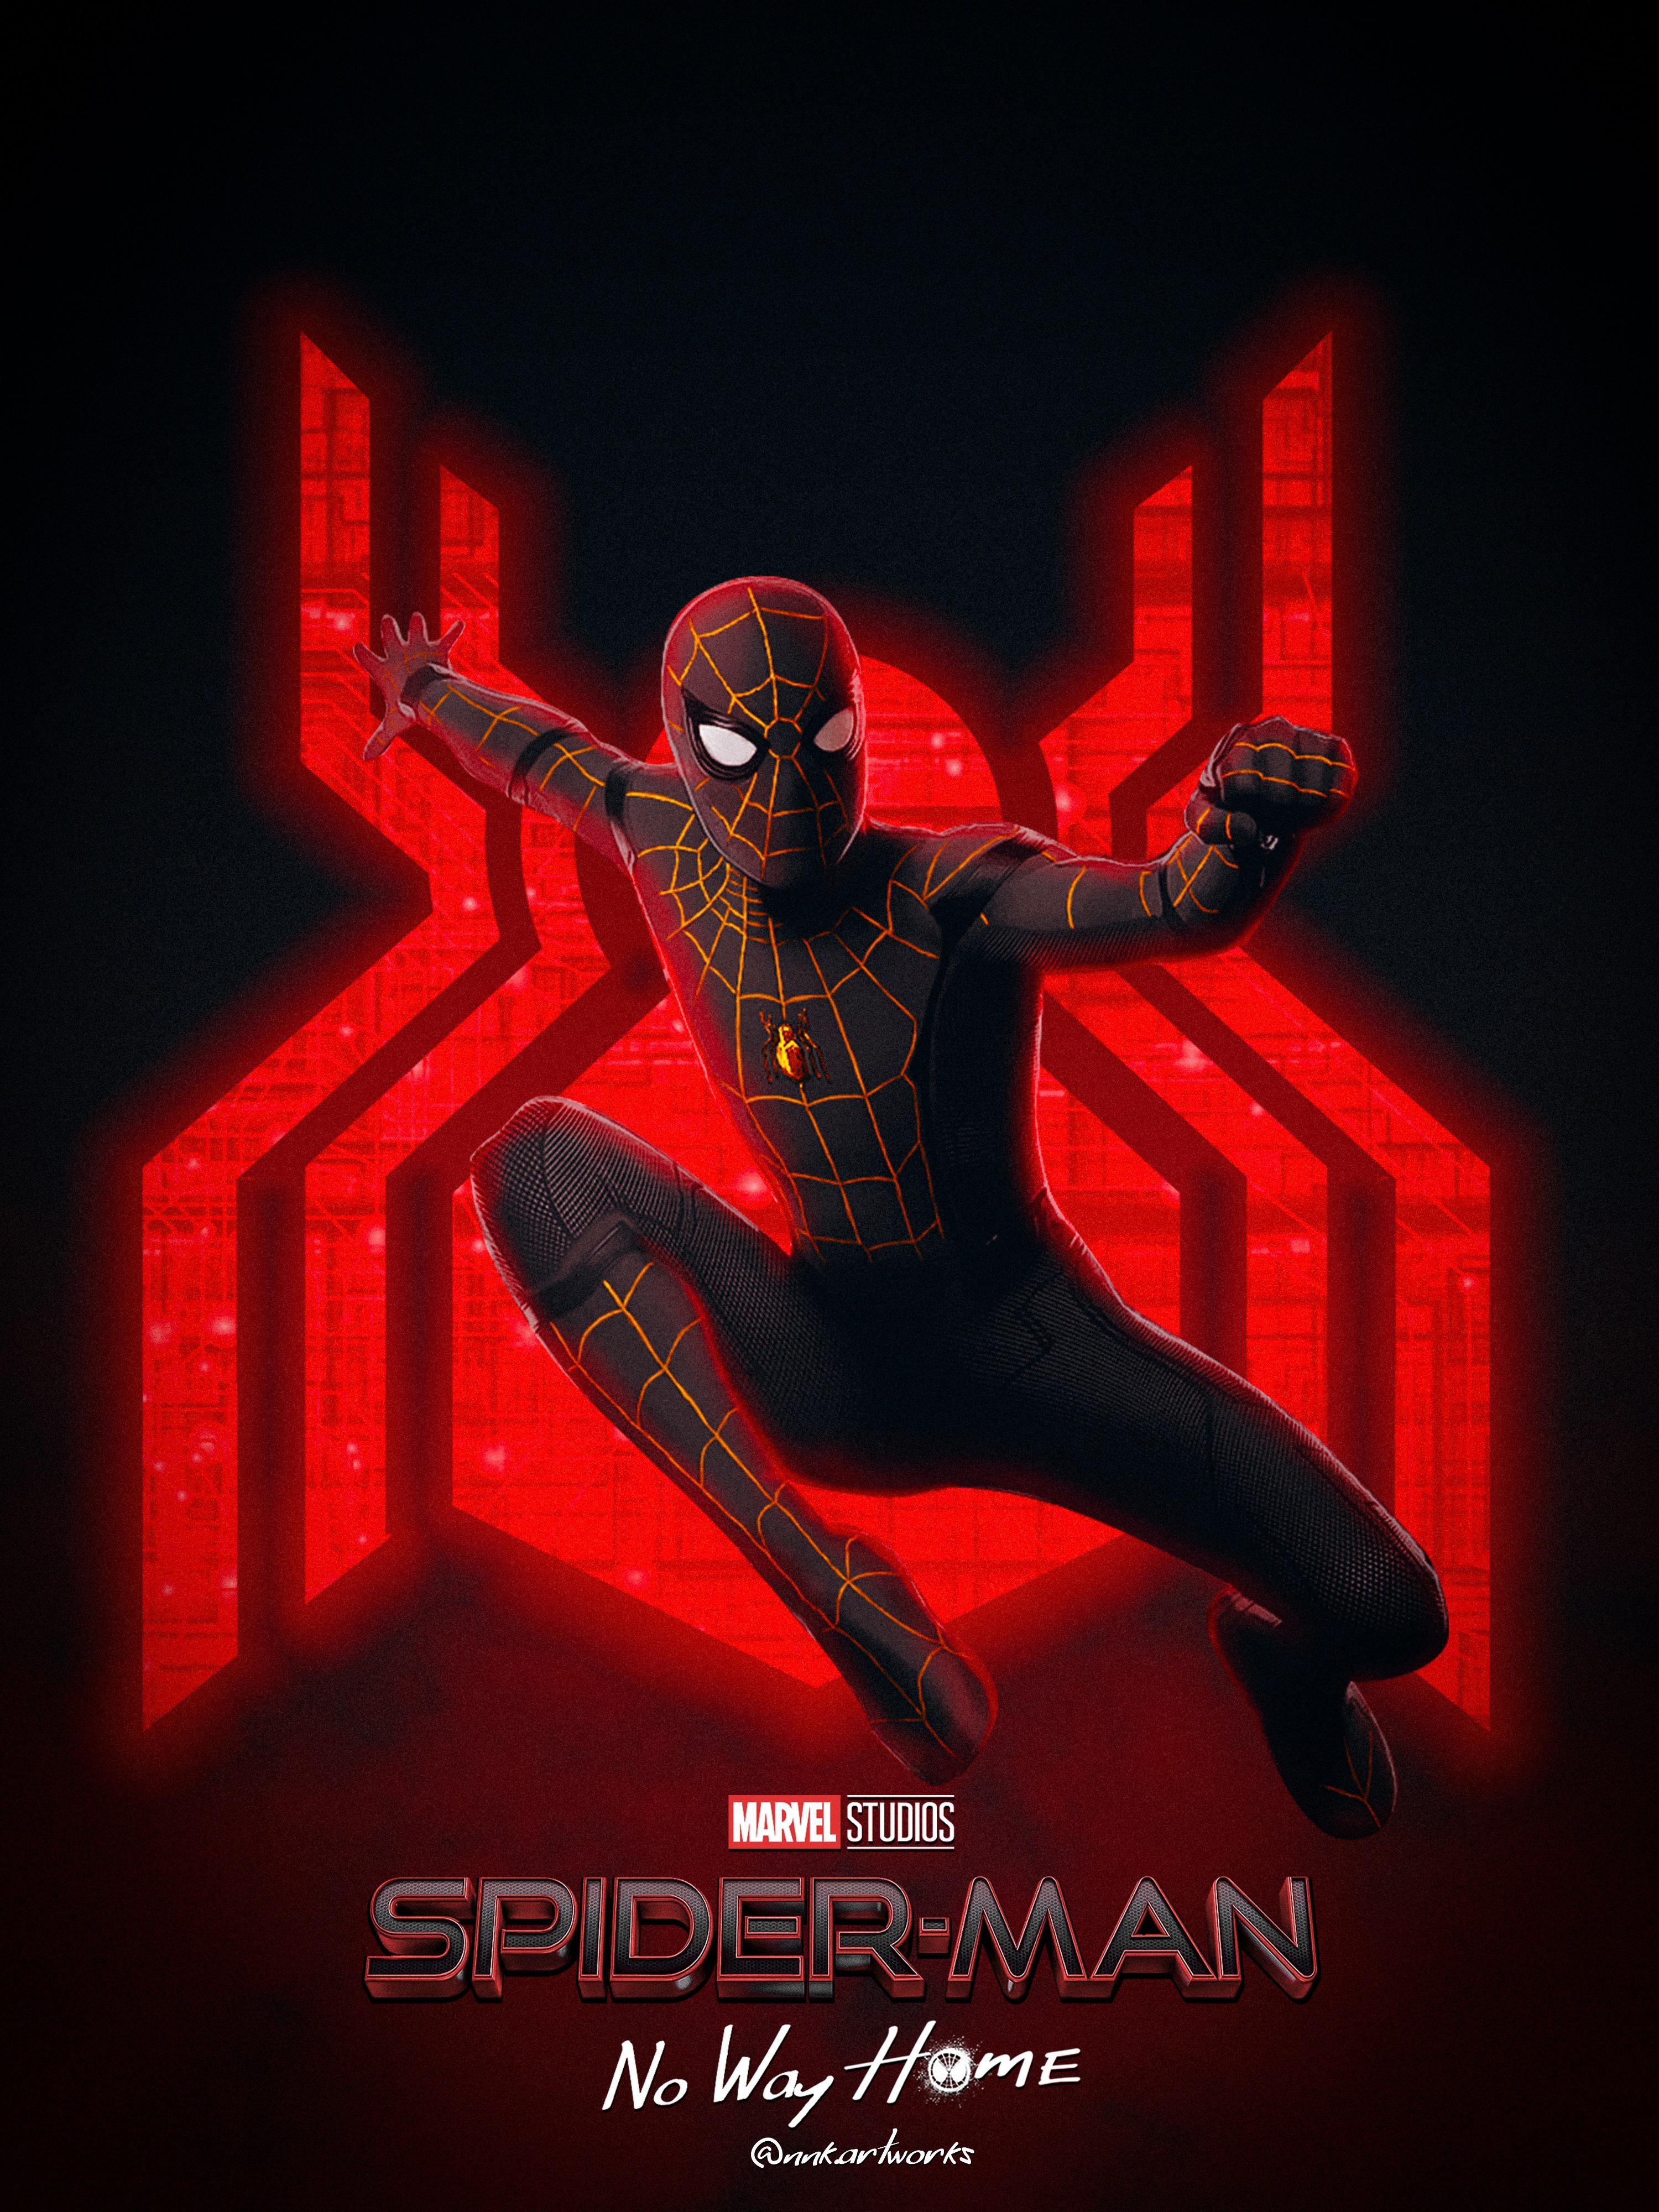 Spider Man: No Way Home Poster. Wallpaper For Mobile And Desktop